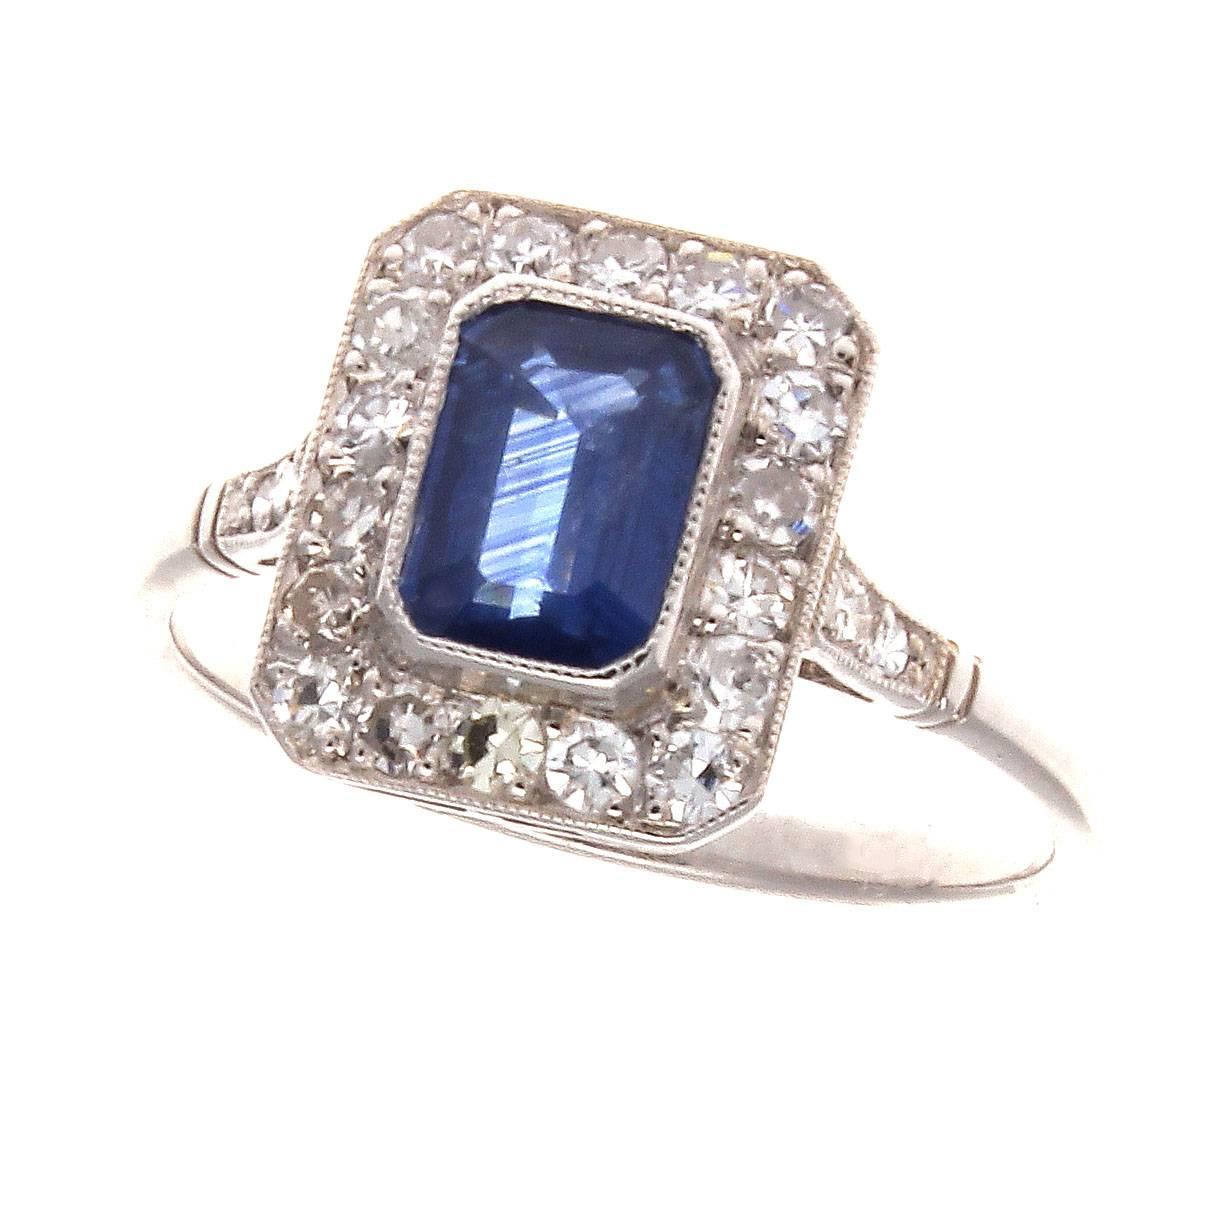 The halo ring was first introduced to the world during the Victorian era and the intentions were to emphasize the color of the center stone.  Featuring a 1.19 carat emerald cut serene blue sapphire that is perfectly framed by numerous colorless